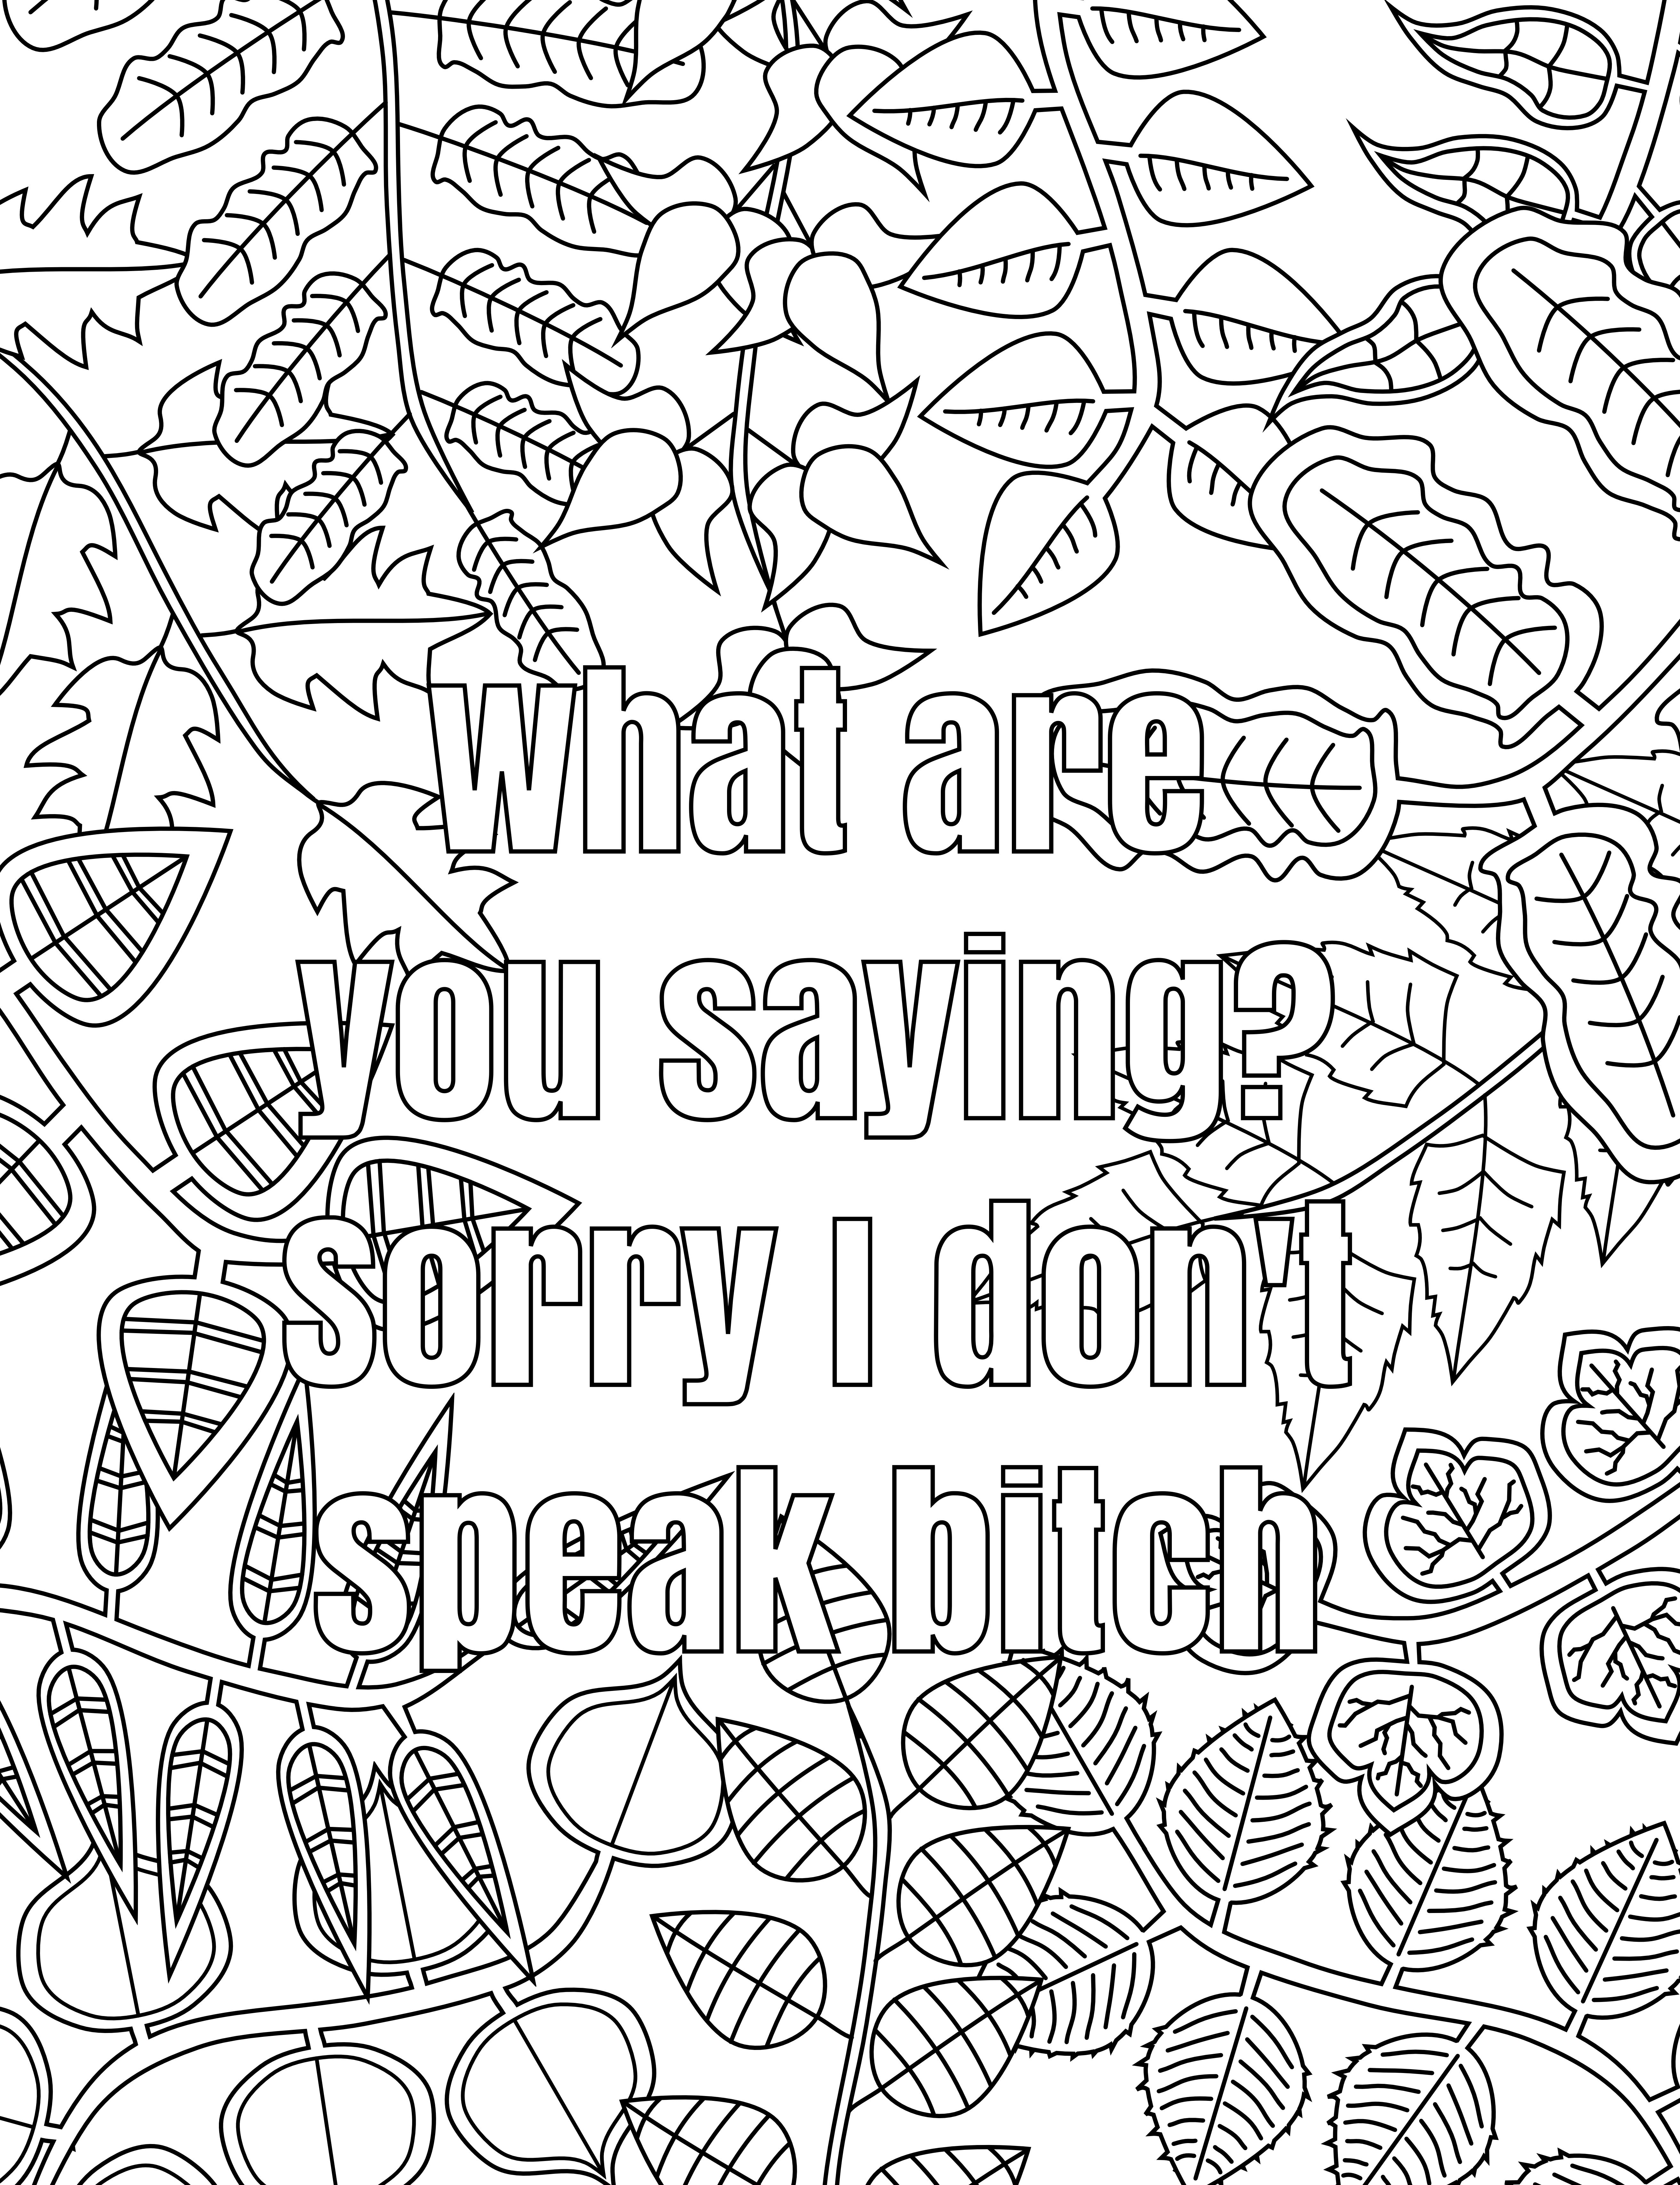 Free Printable Coloring Pages For Adults Only Swear Words Download - Free Printable Coloring Pages For Adults Swear Words